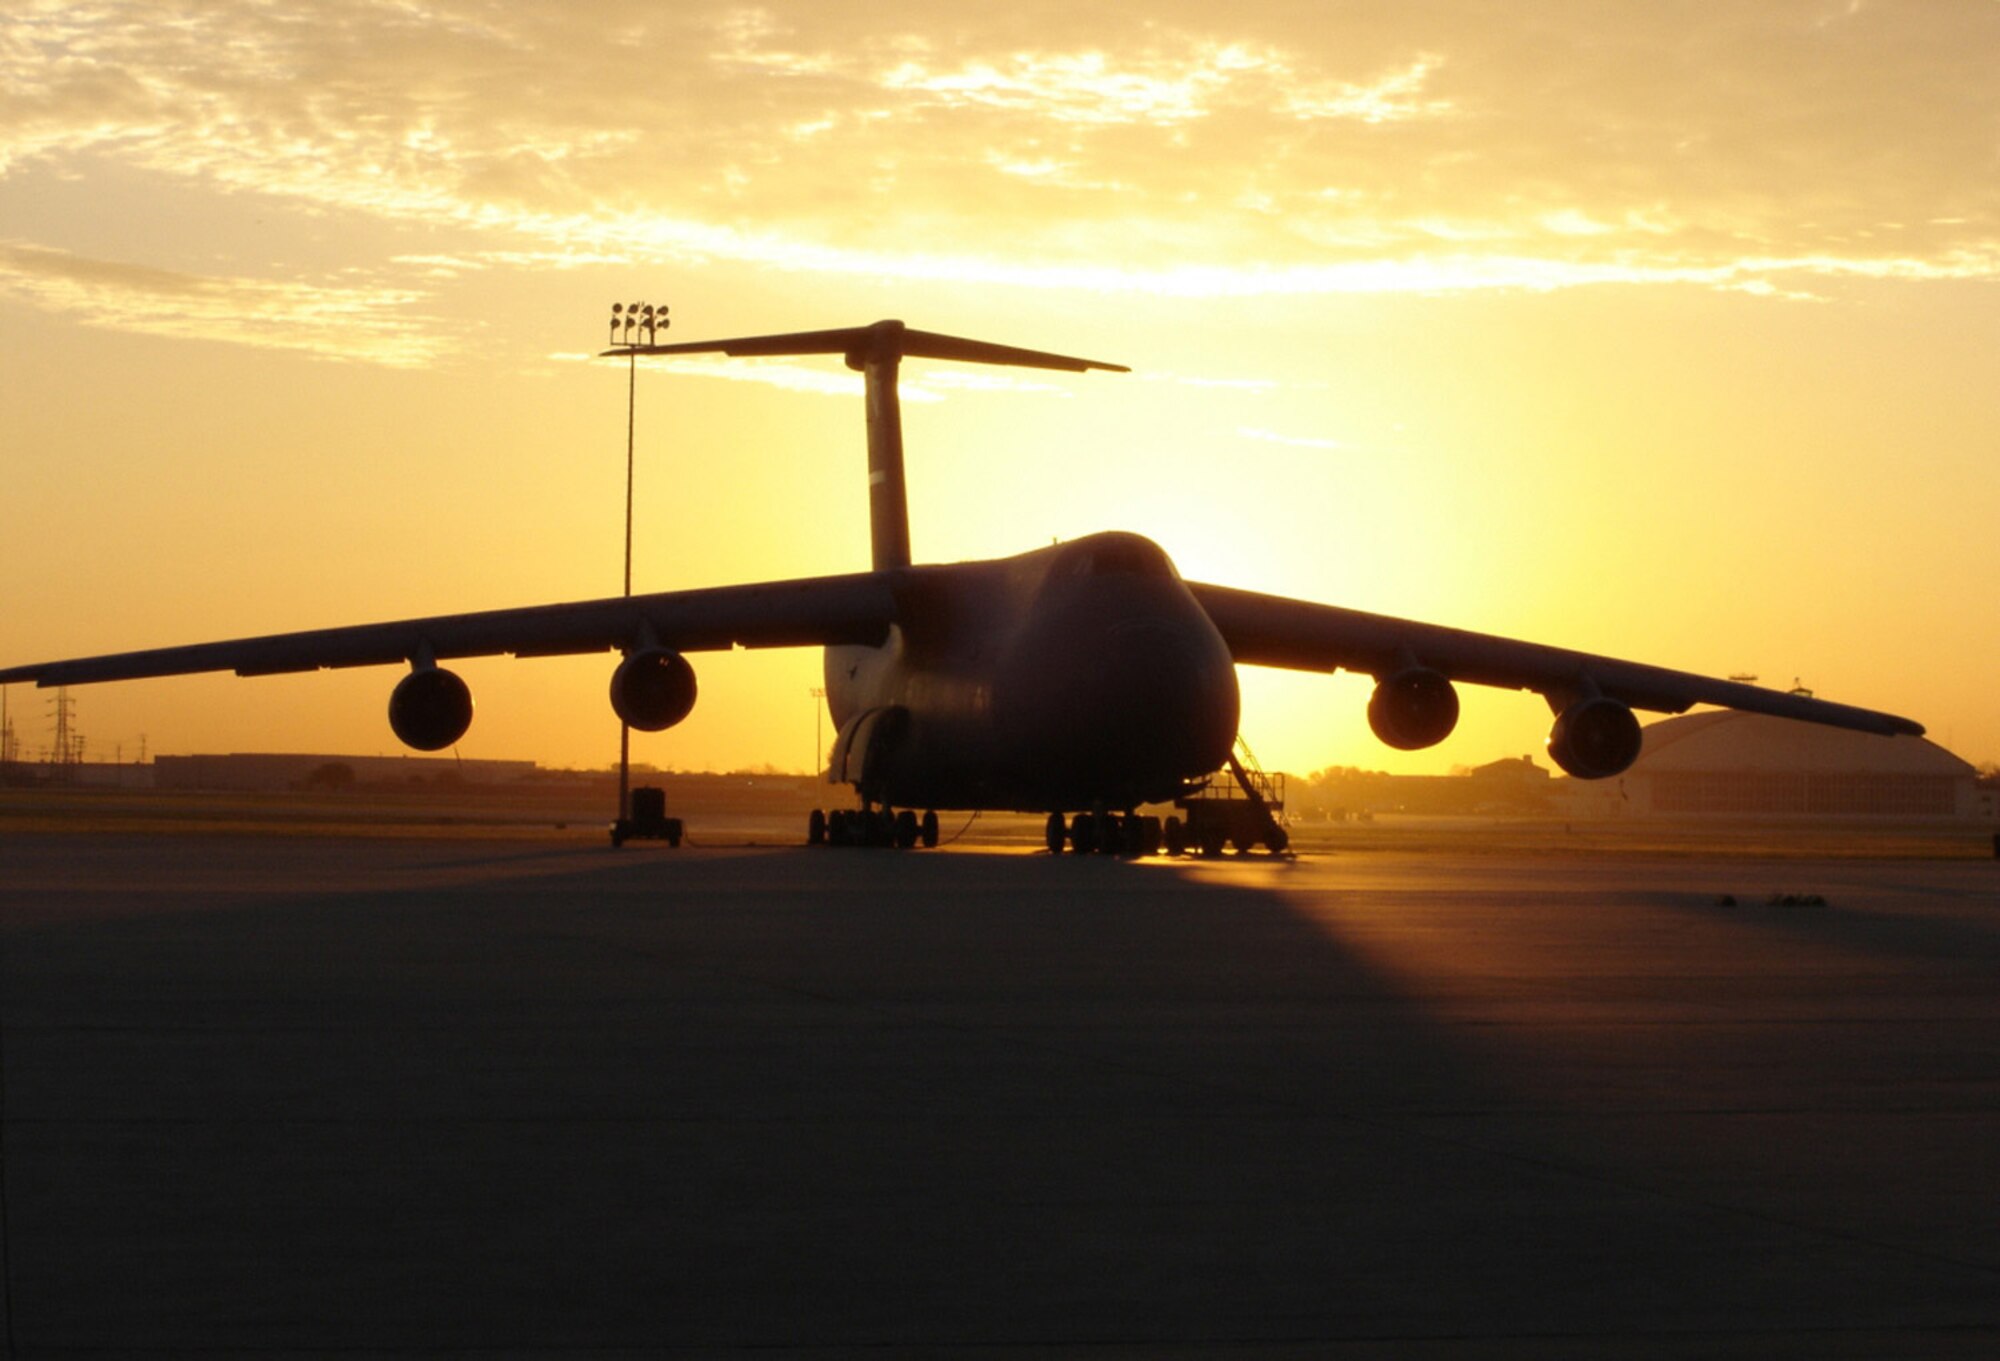 Air Force Reserve Command's 433rd Airlift Wing at Lackland Air Force Base, Texas, is home to 16 C-5A Galaxy Airlifters. The C-5 is the only aircraft capable of transporting oversized cargo, non-stop, to anywhere in the world. C-5s from Lackland participated in humanitarian missions to include Hurricane relief and carrying aid to the victims of the earthquake in Pakistan. The C-5s from Lackland also support the airlift needs of Operation Iraqi Freedom and Operation Enduring Freedom. (U.S. Air Force Photo by Senior Airman Daniel Pool, 433rd Aircraft Maintenance Squadron)